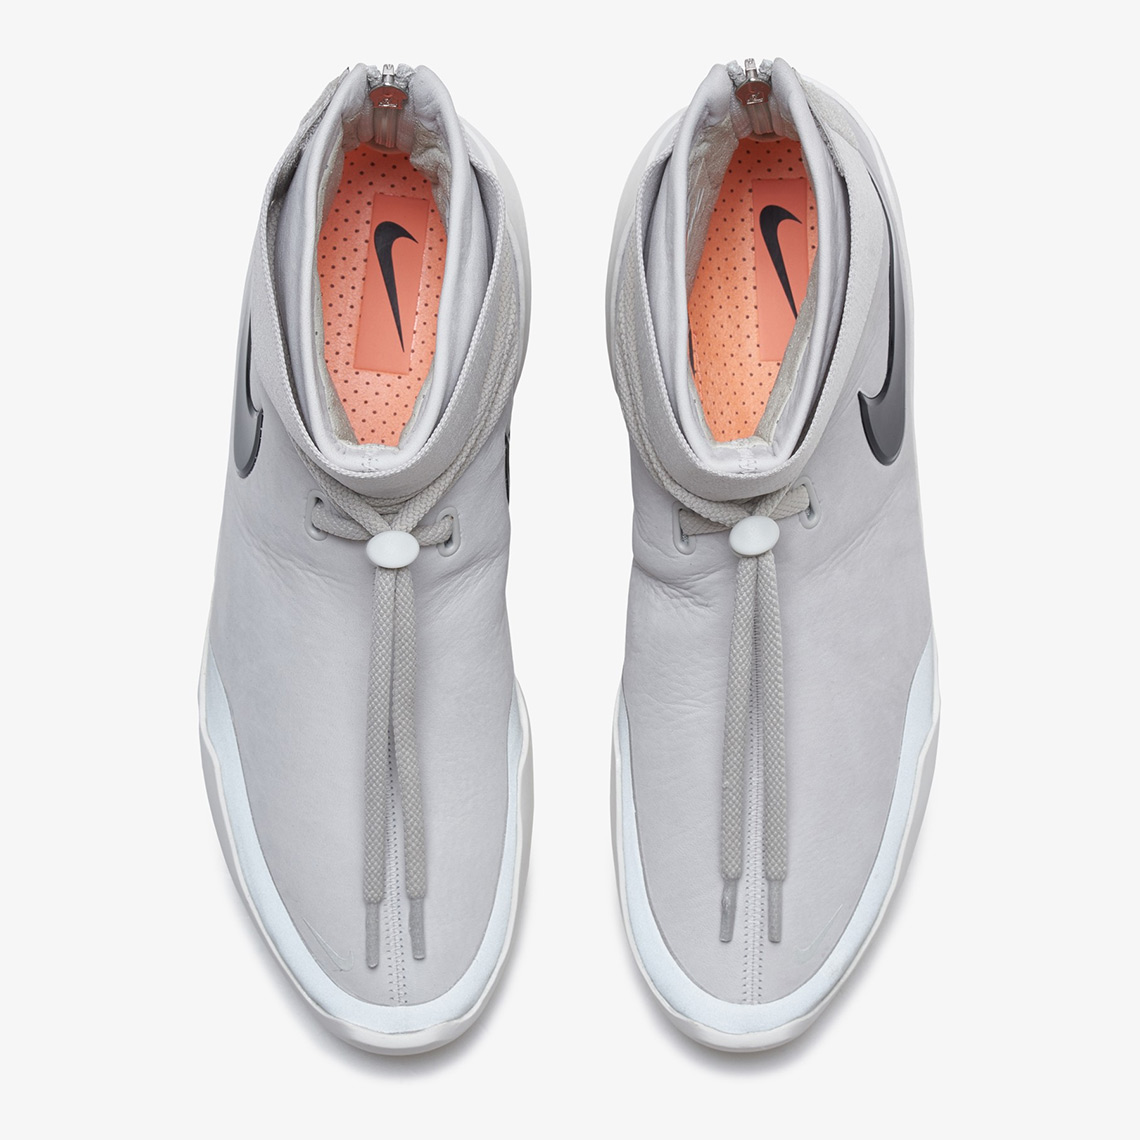 Nike Air Fear Of God Shoot Around White First | SneakerNews.com